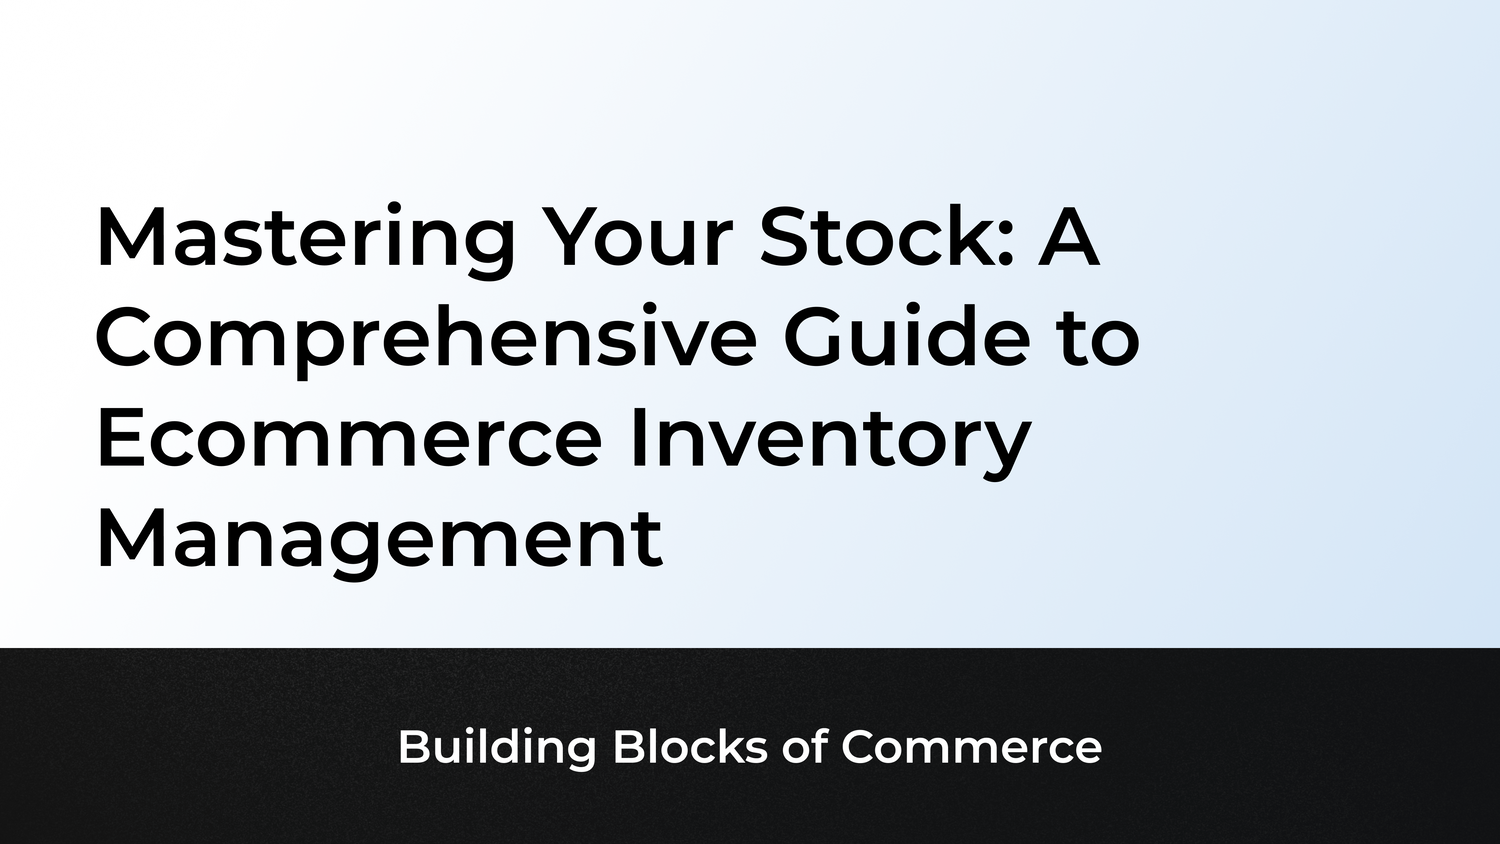 Mastering Your Stock: A Comprehensive Guide to Ecommerce Inventory Management